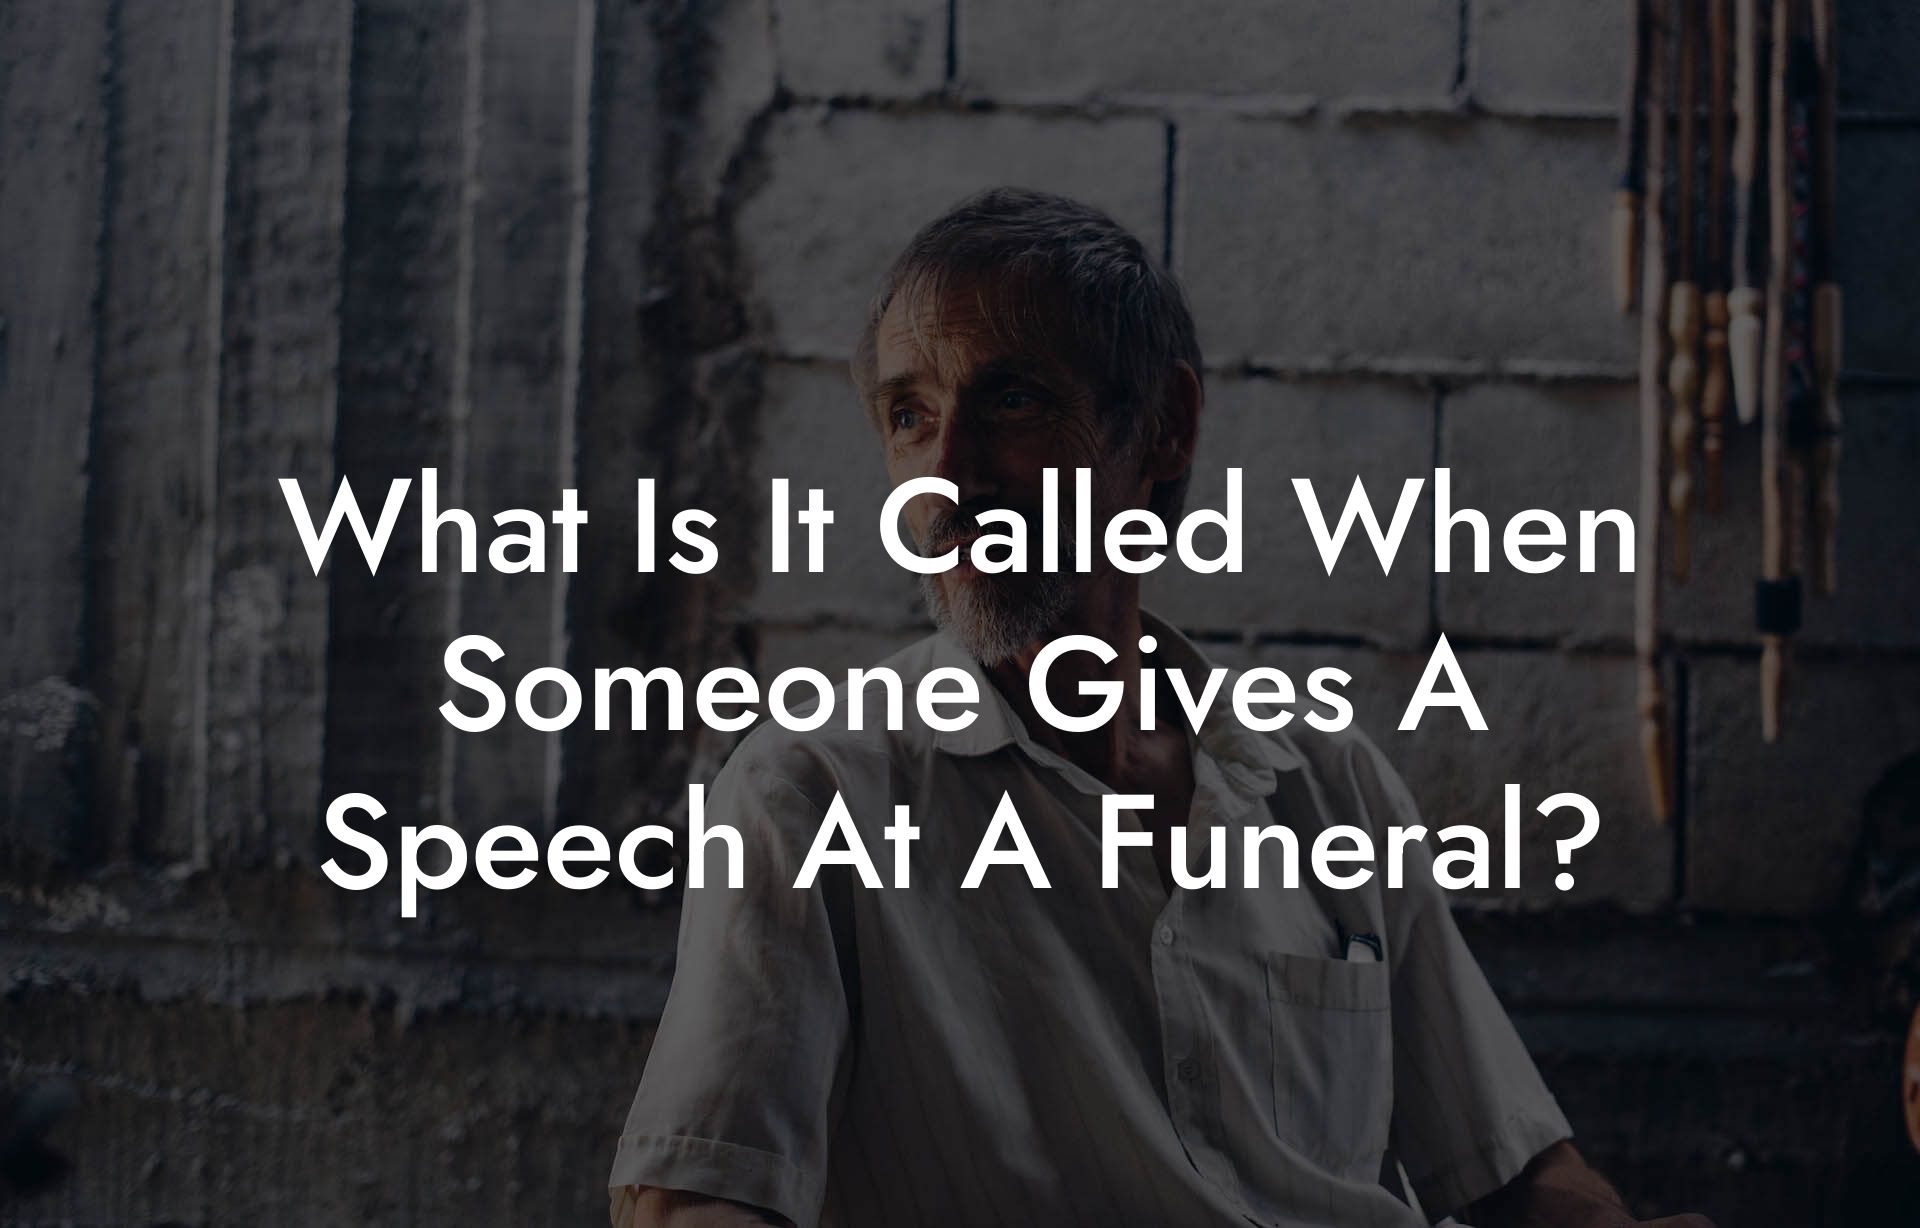 What Is It Called When Someone Gives A Speech At A Funeral?